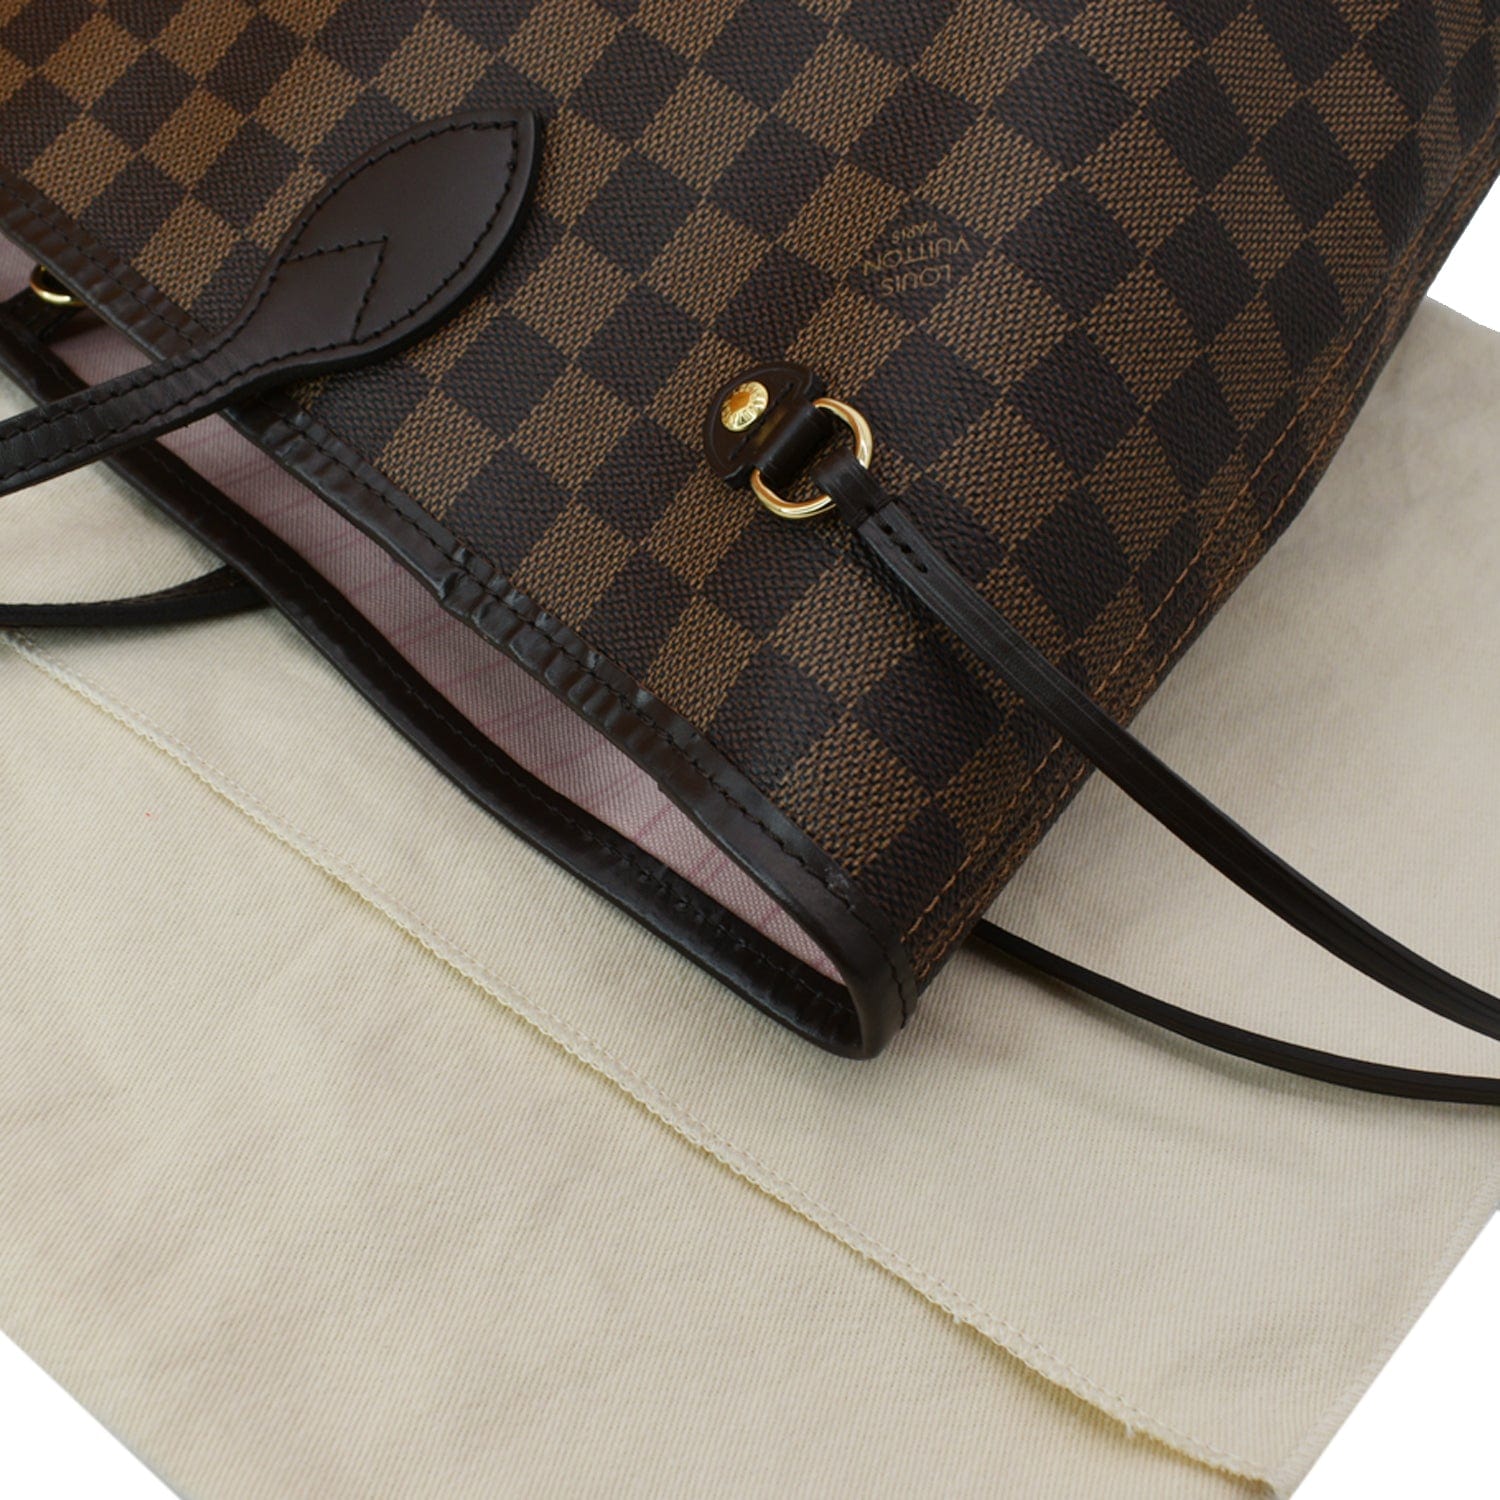 Authentic 2017 Louis Vuitton Neverfull MM Tote Bag in Damier Ebene